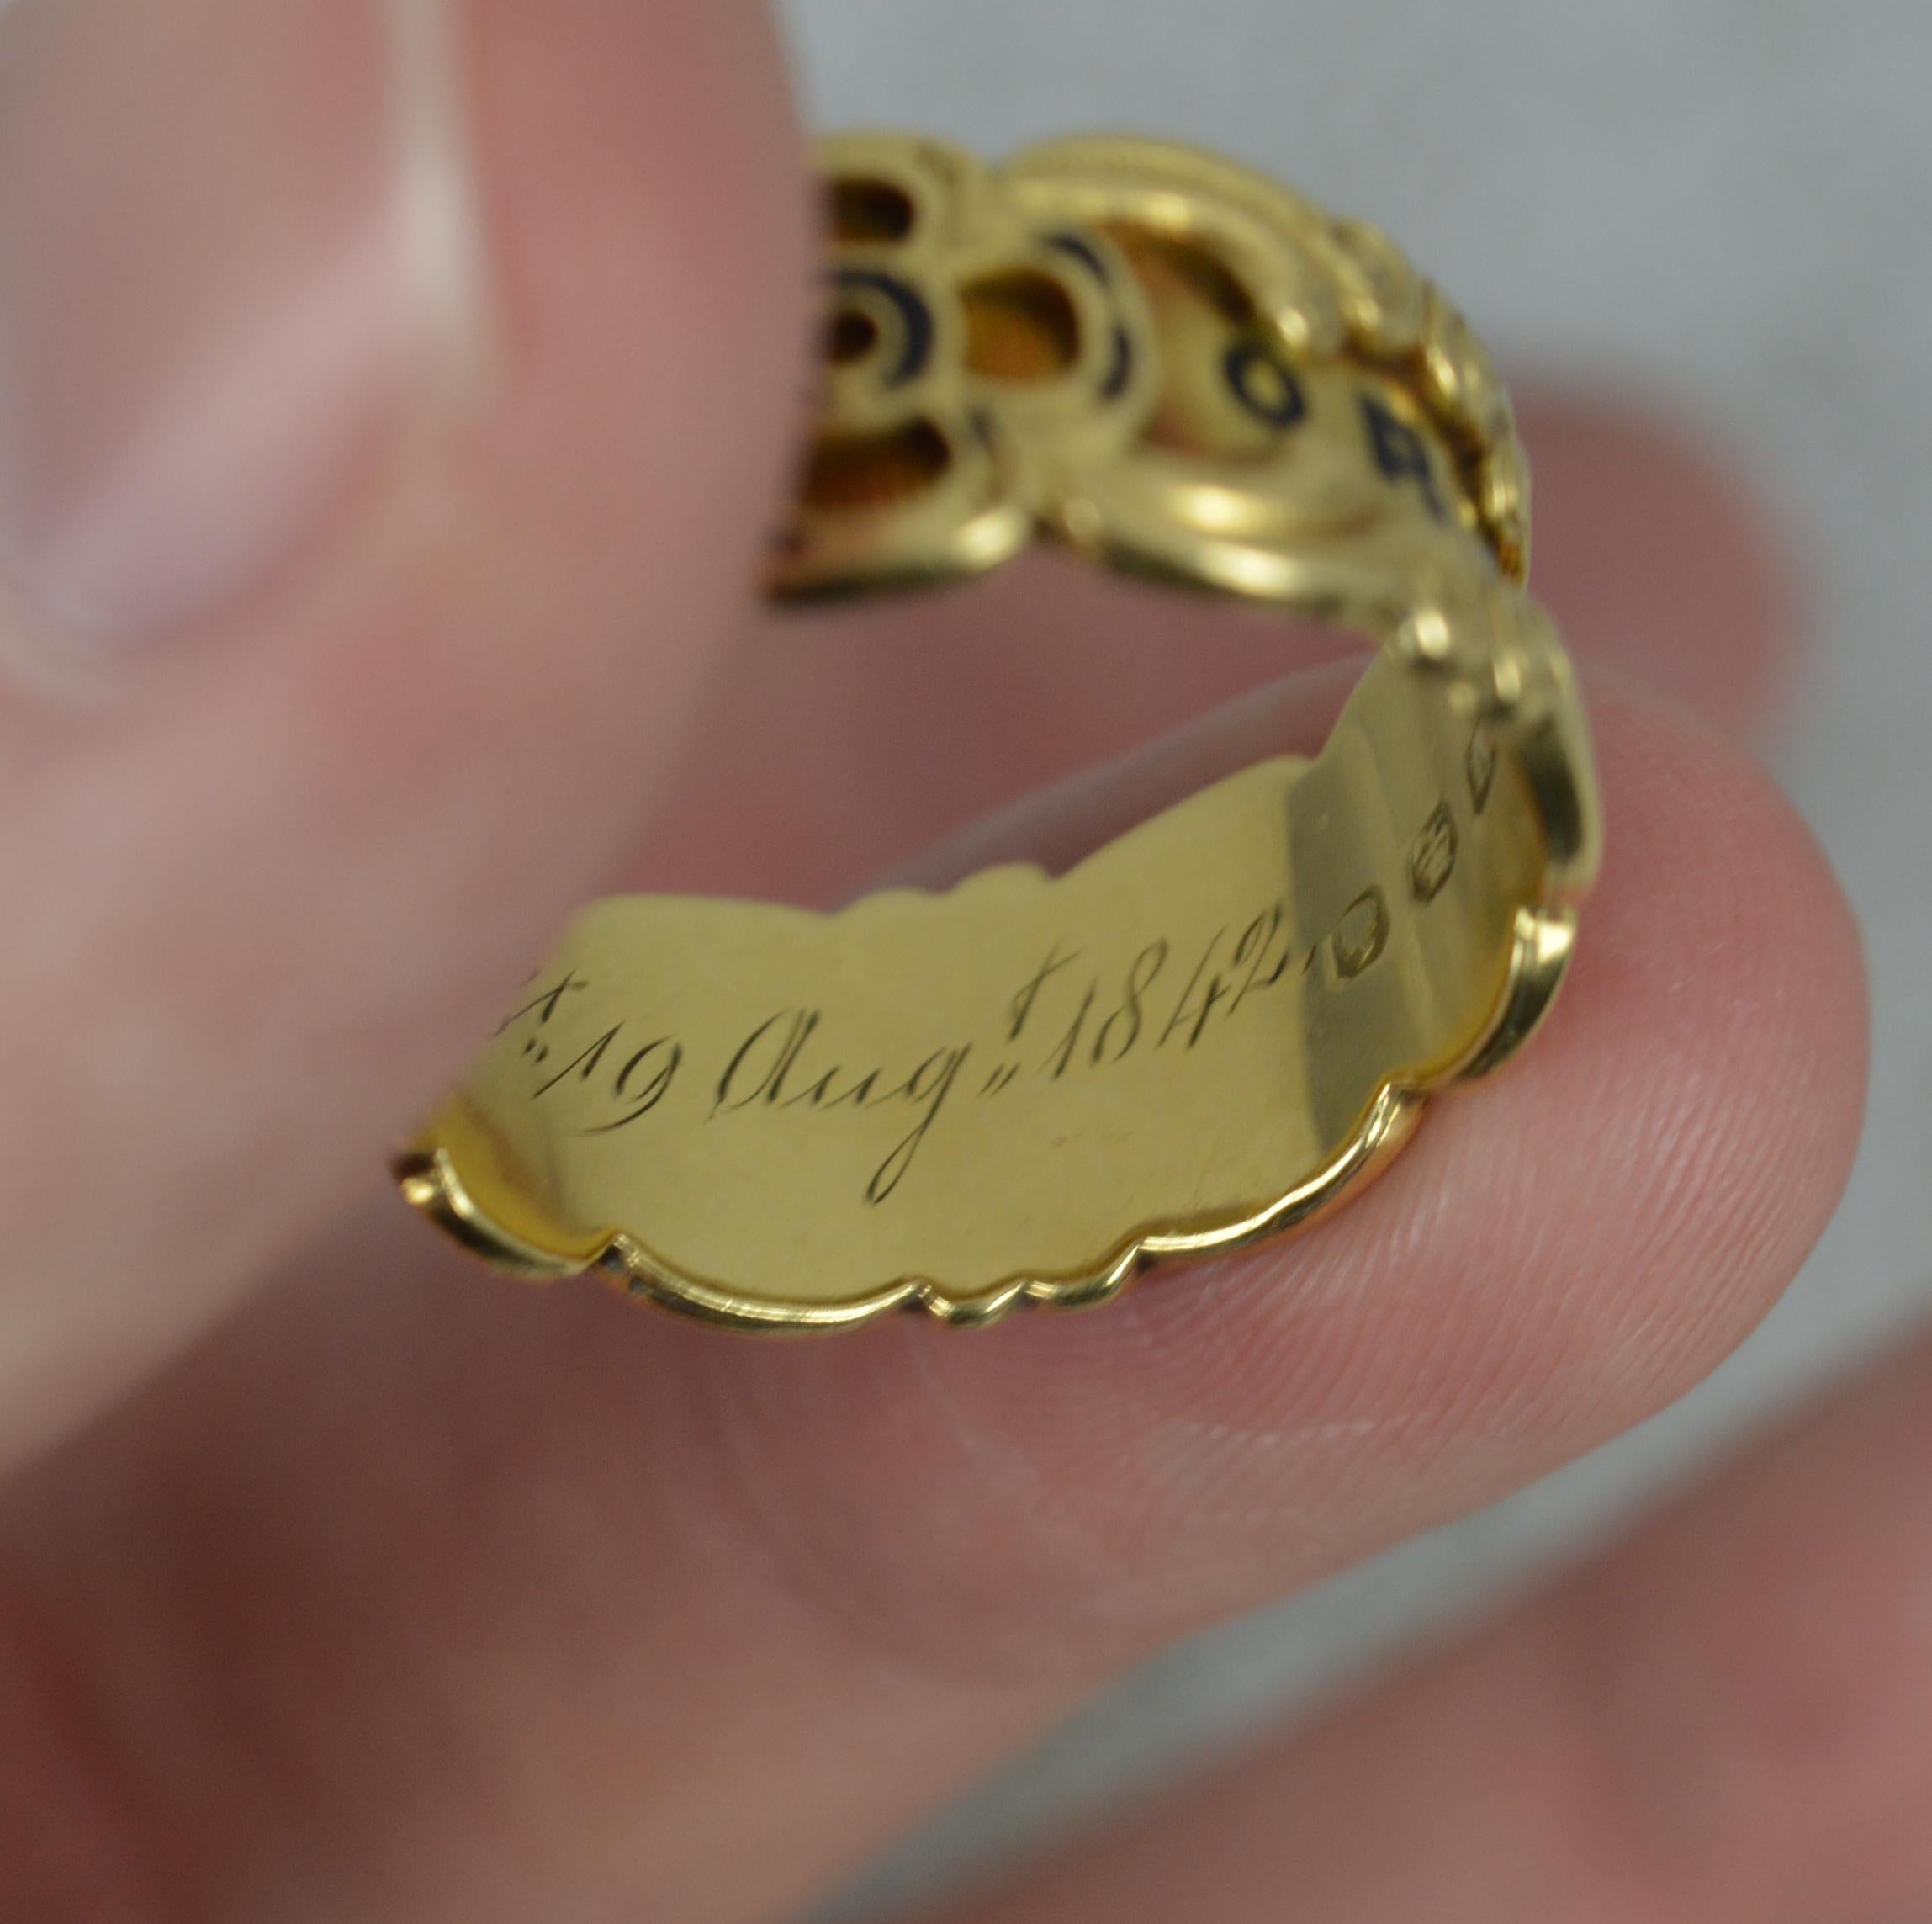 1842 Victorian 18 Carat Gold Enamel In Memory of Mourning Band Ring For Sale 2